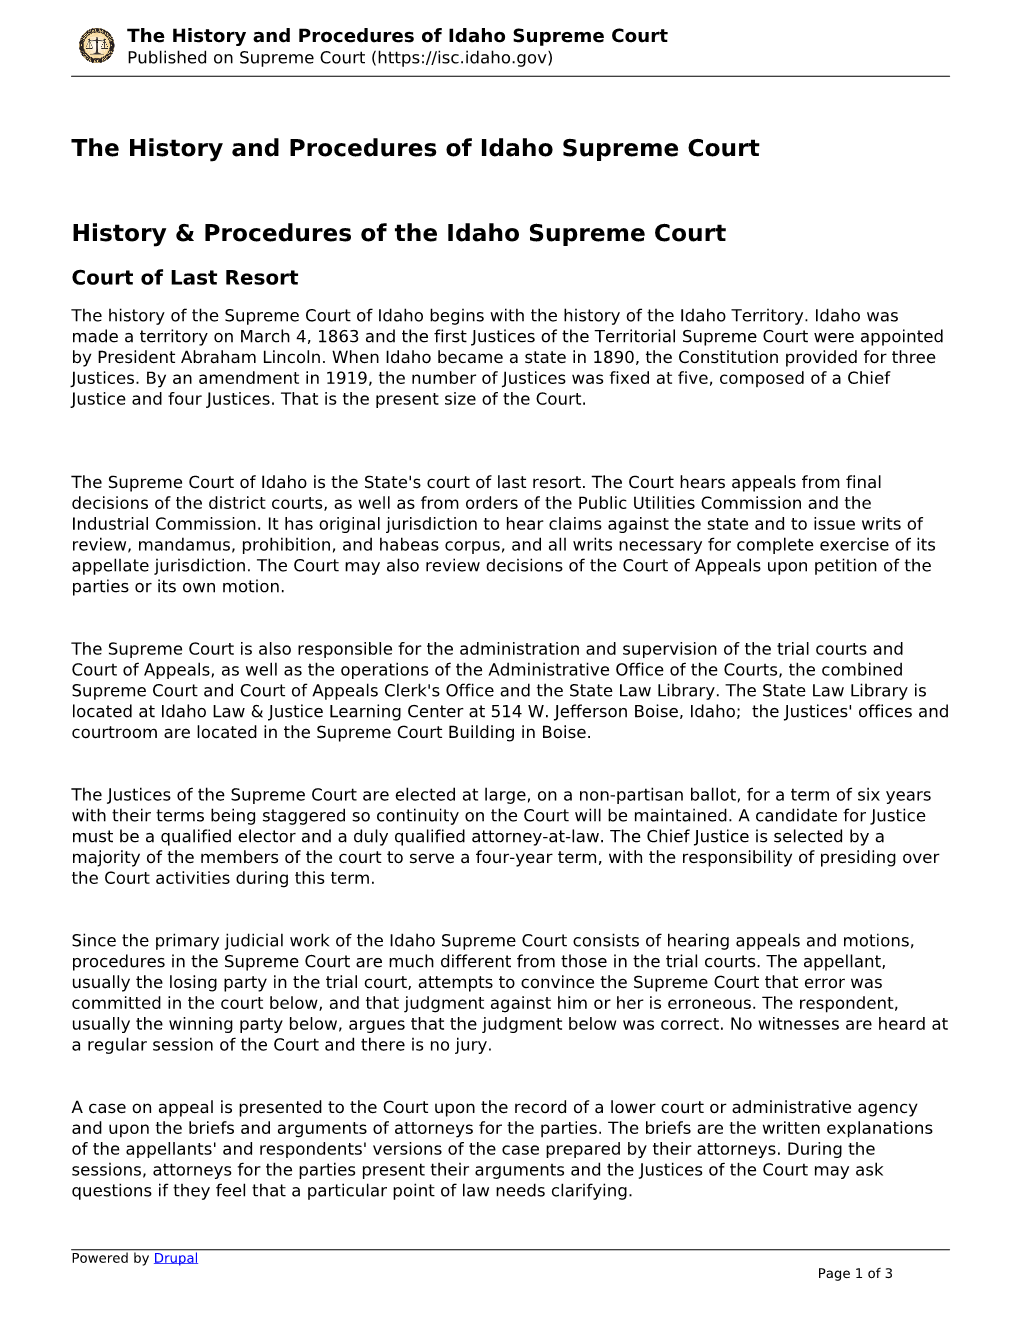 The History and Procedures of Idaho Supreme Court Published on Supreme Court (